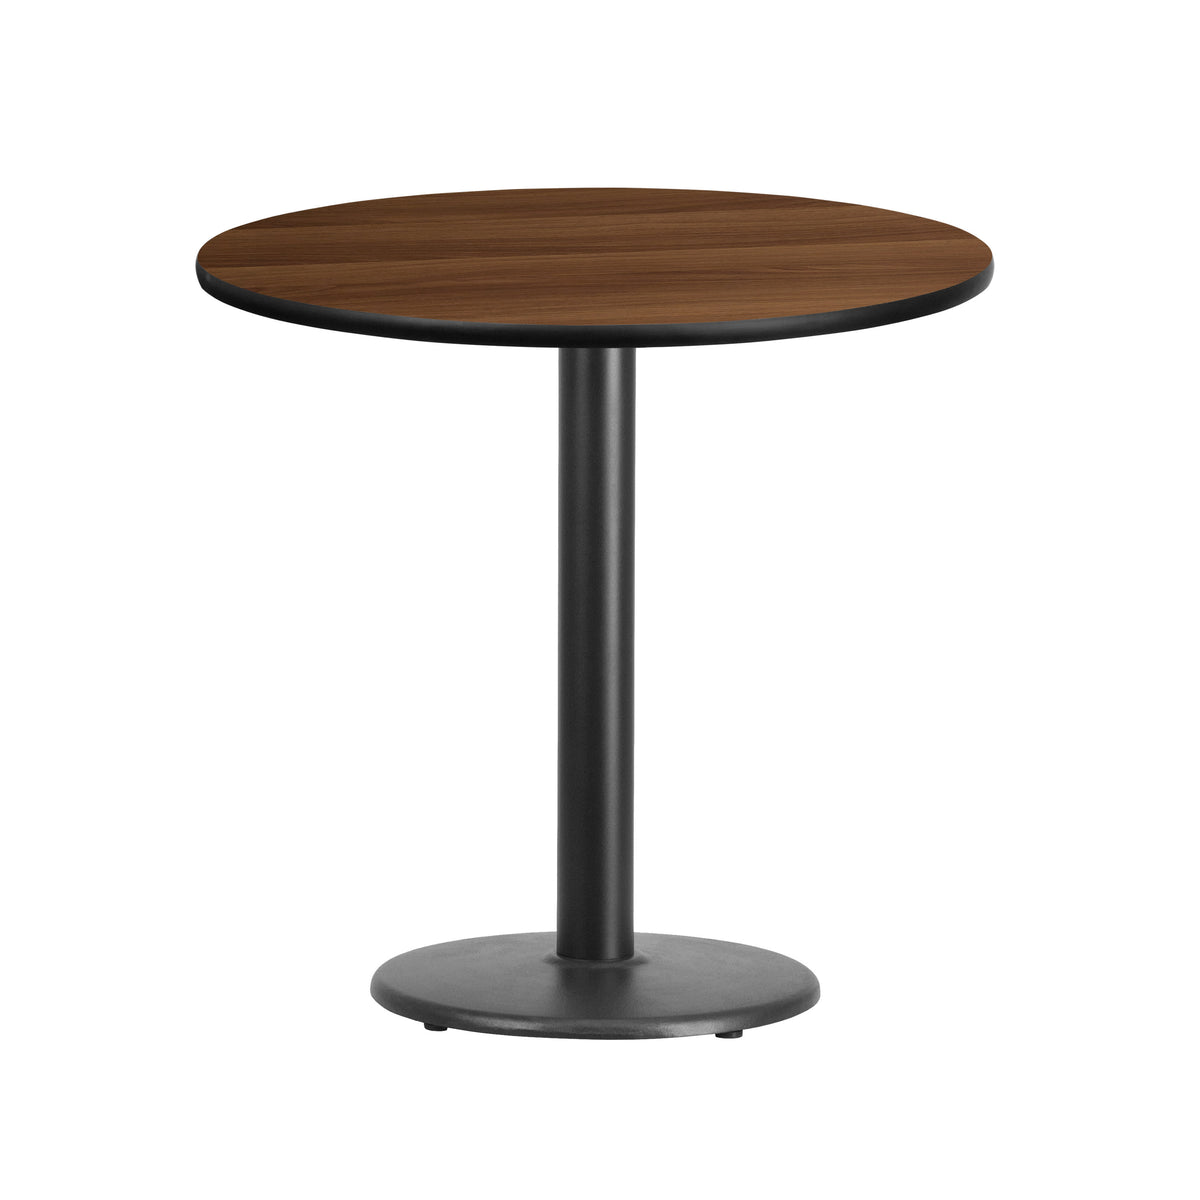 Walnut |#| 30inch Round Walnut Laminate Table Top with 18inch Round Table Height Base